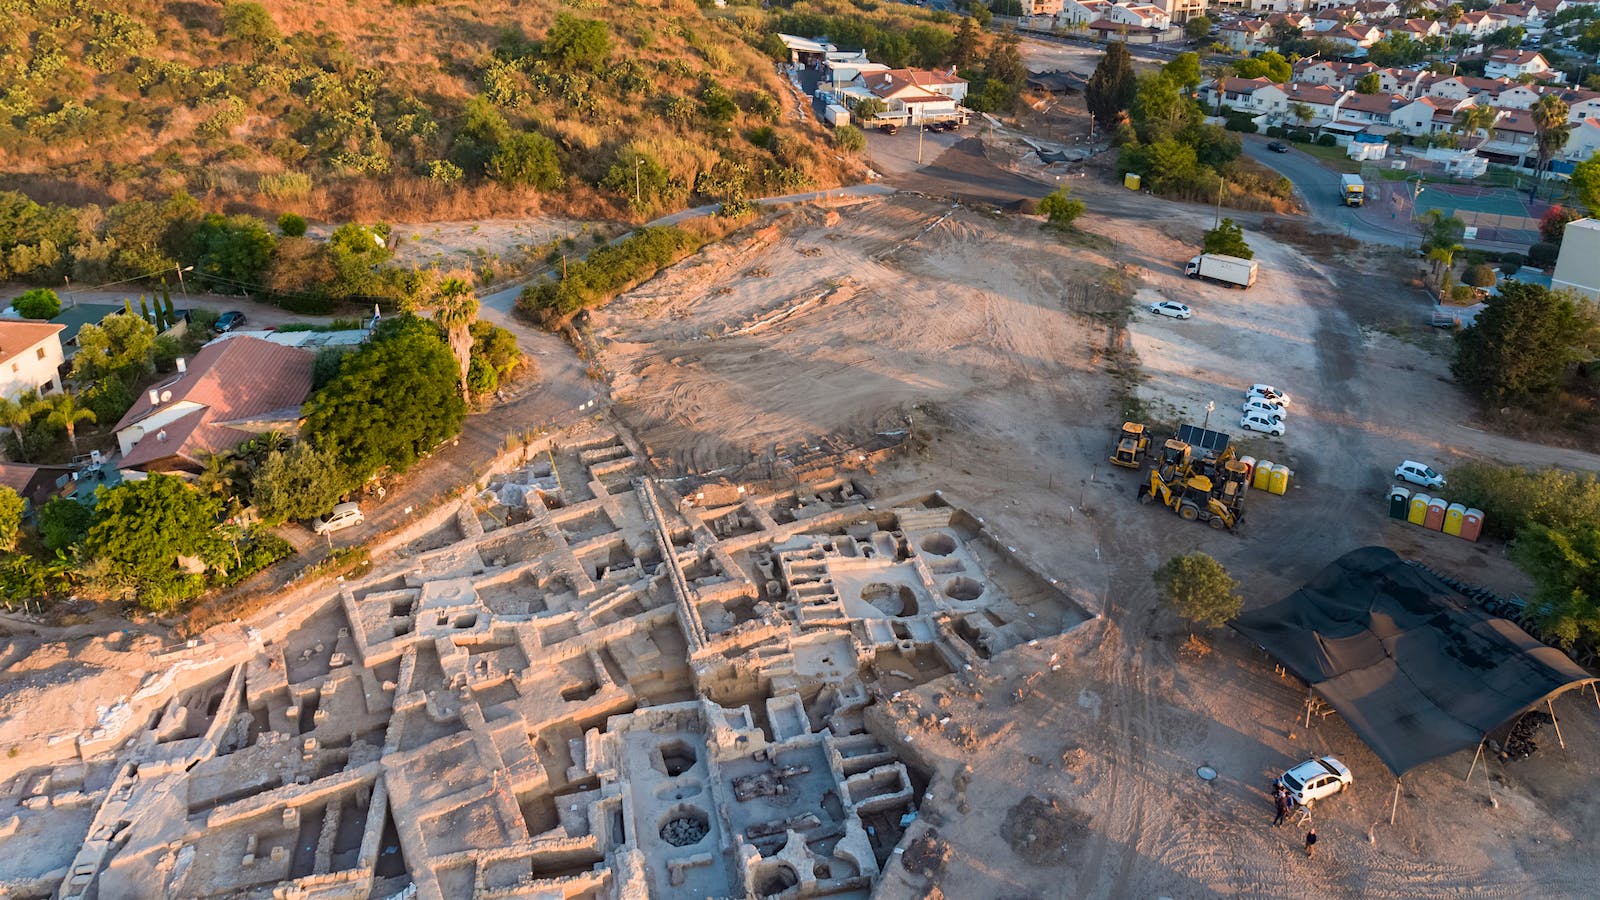 Byzantine Behemoth: Massive 1,500-Year-Old Winery Discovered in Israel